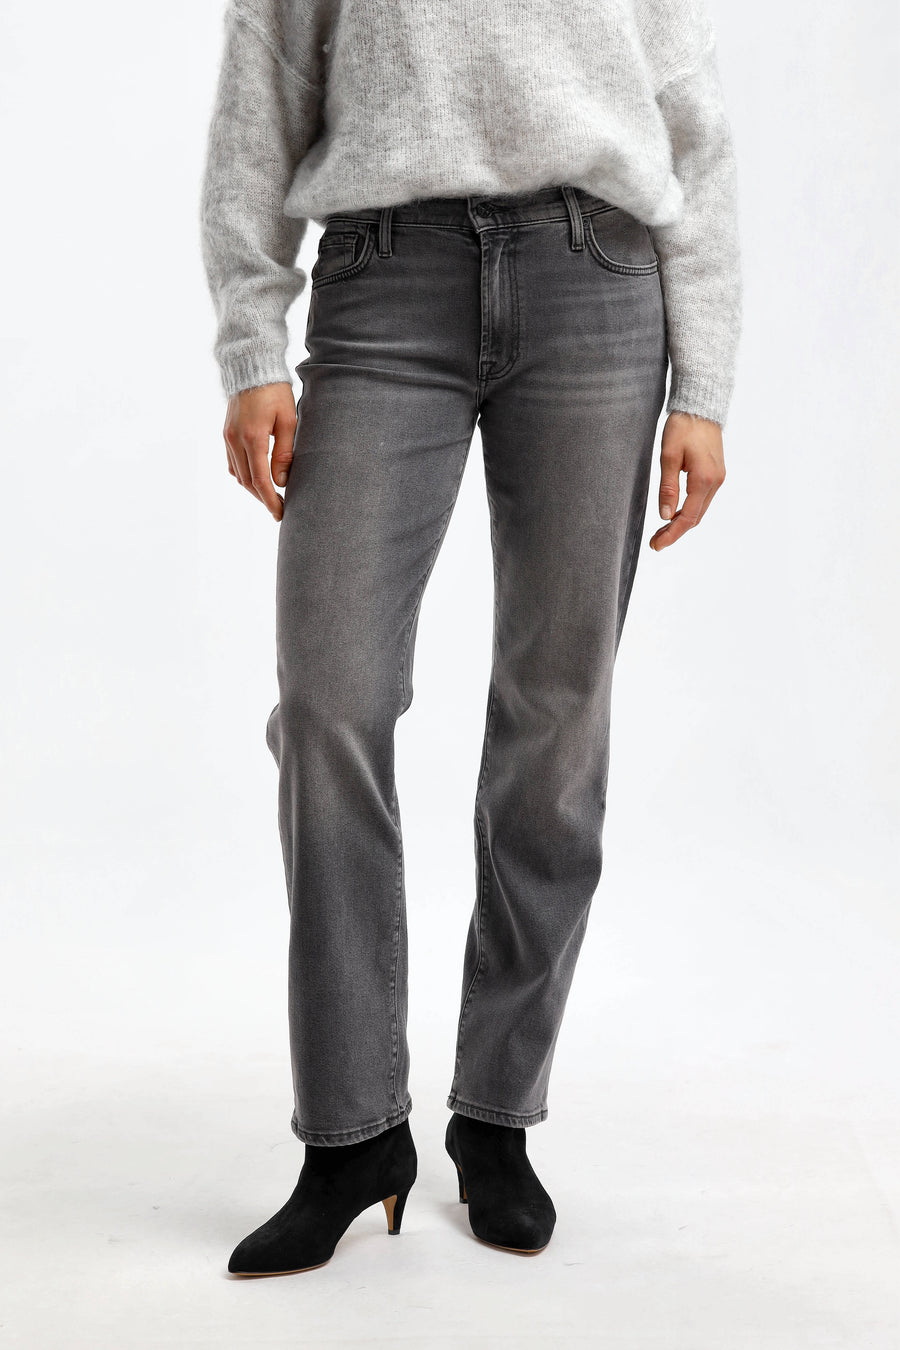 Jeans Ellie Straight in Schwarz7 For All Mankind - Anita Hass